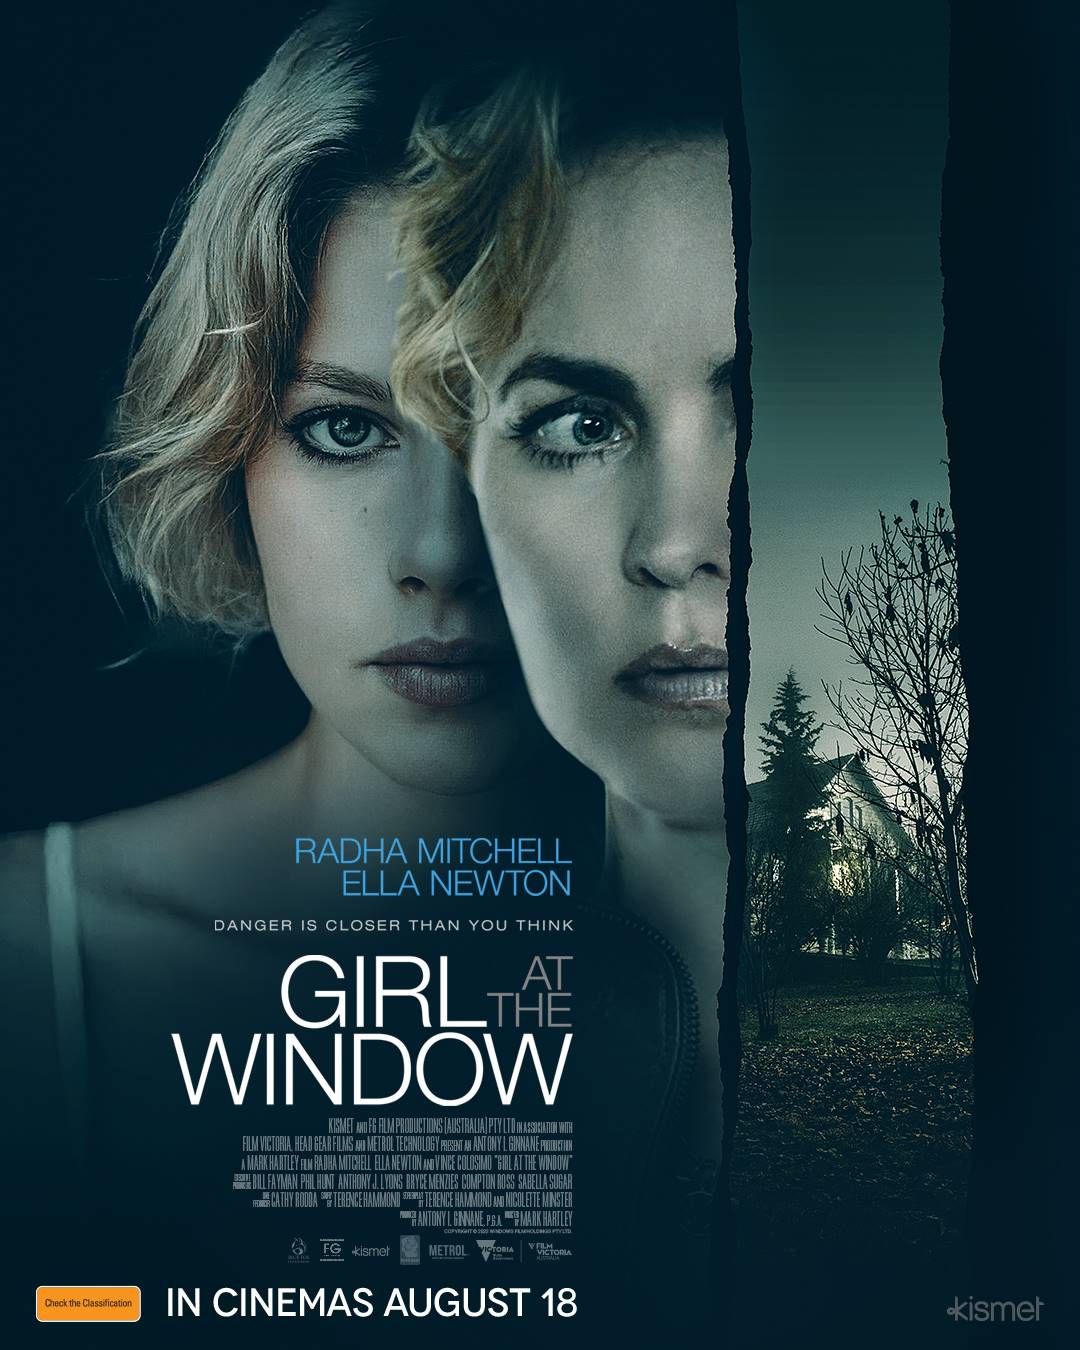 GIRL AT THE WINDOW (2022) 1080p WEB-DL AAC2.0 RETAIL NL Sub [UFR PRIMEUR]